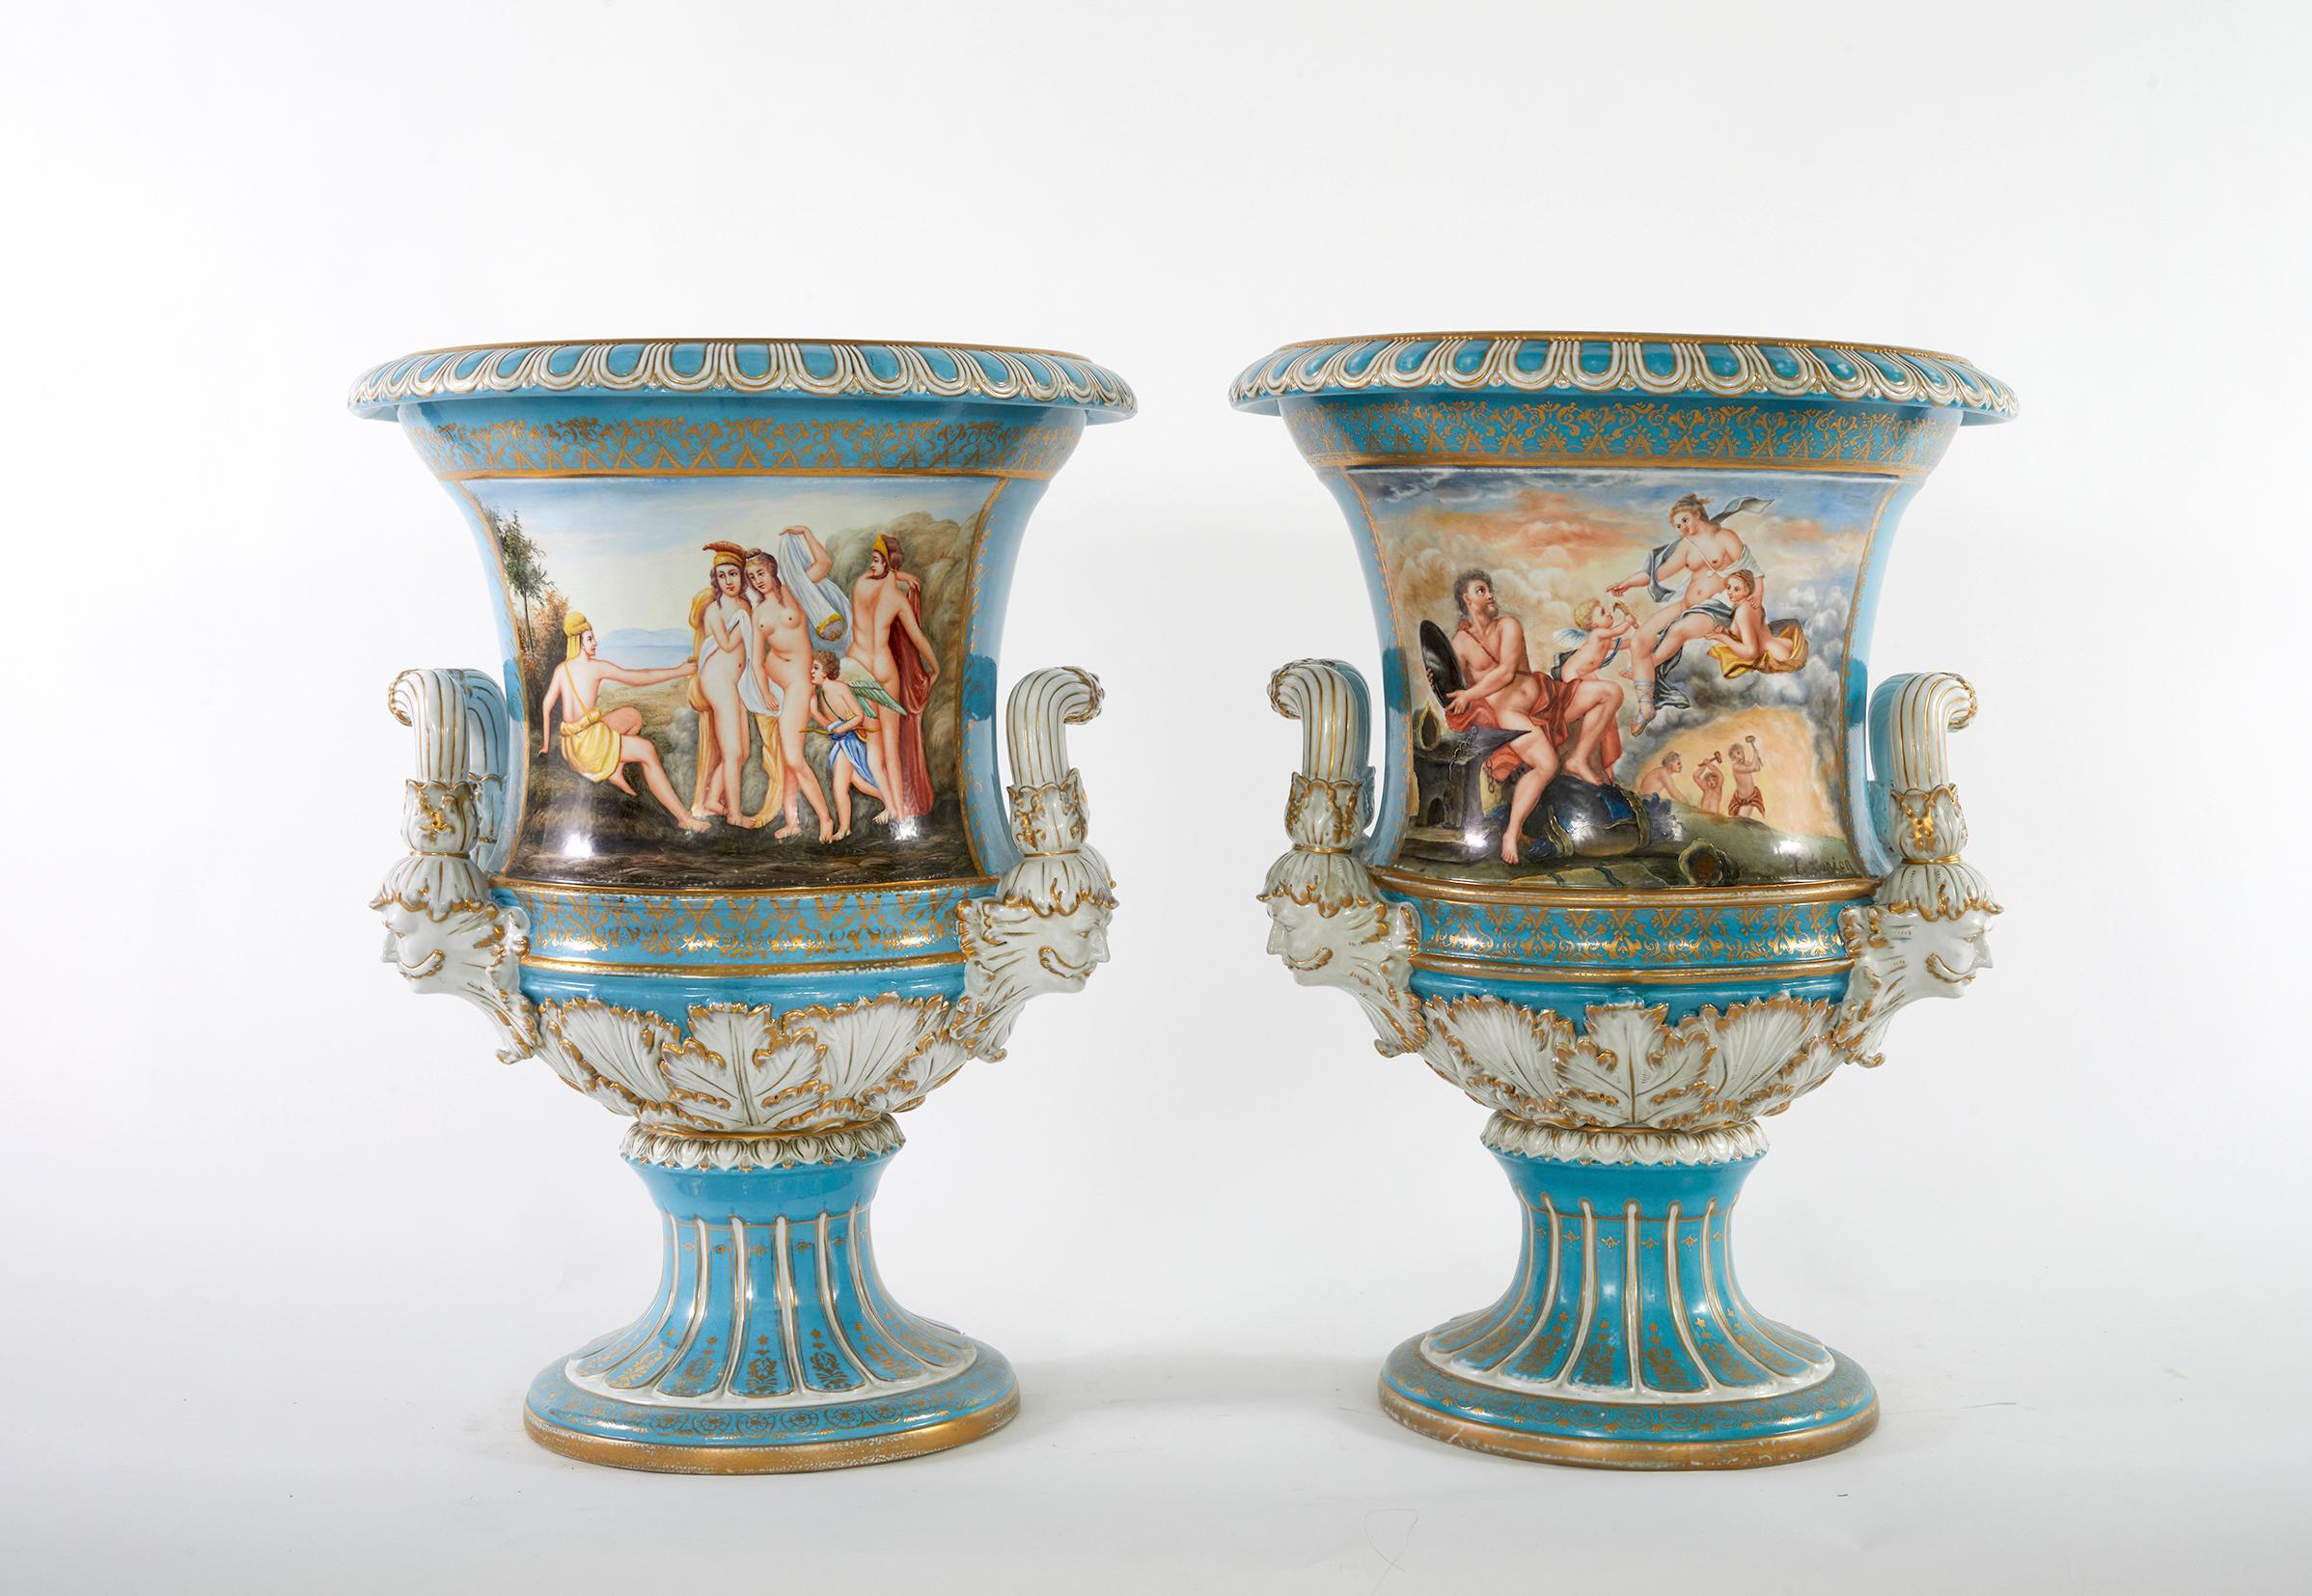 Very large pair Sèvres-Style porcelain decorative Campana Urns / vases. Each vase / urn featuring exterior painted scene design details with two side handles. Each one is in good condition. Minor wear consistent with age / use. Maker's mark